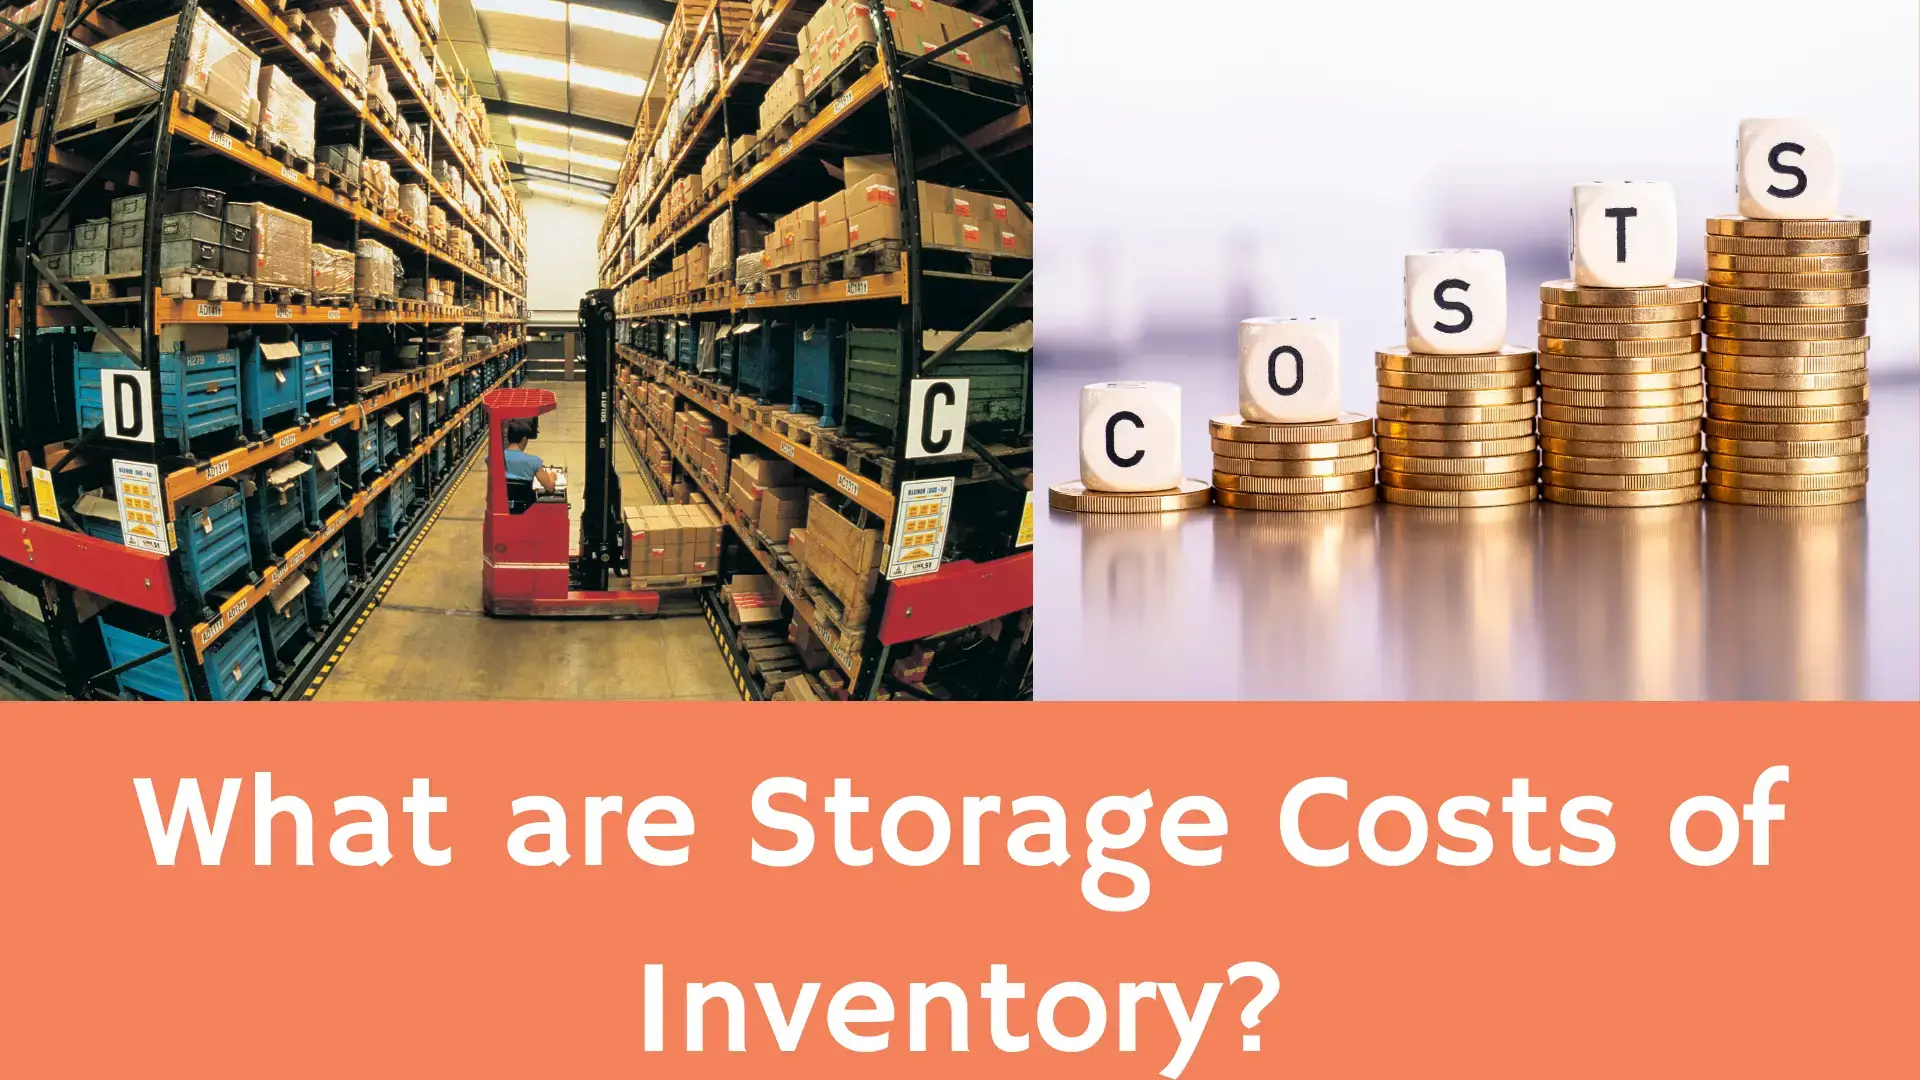 'Video thumbnail for Everything You Need to Know About Inventory Storage Costs: Video Explanation'